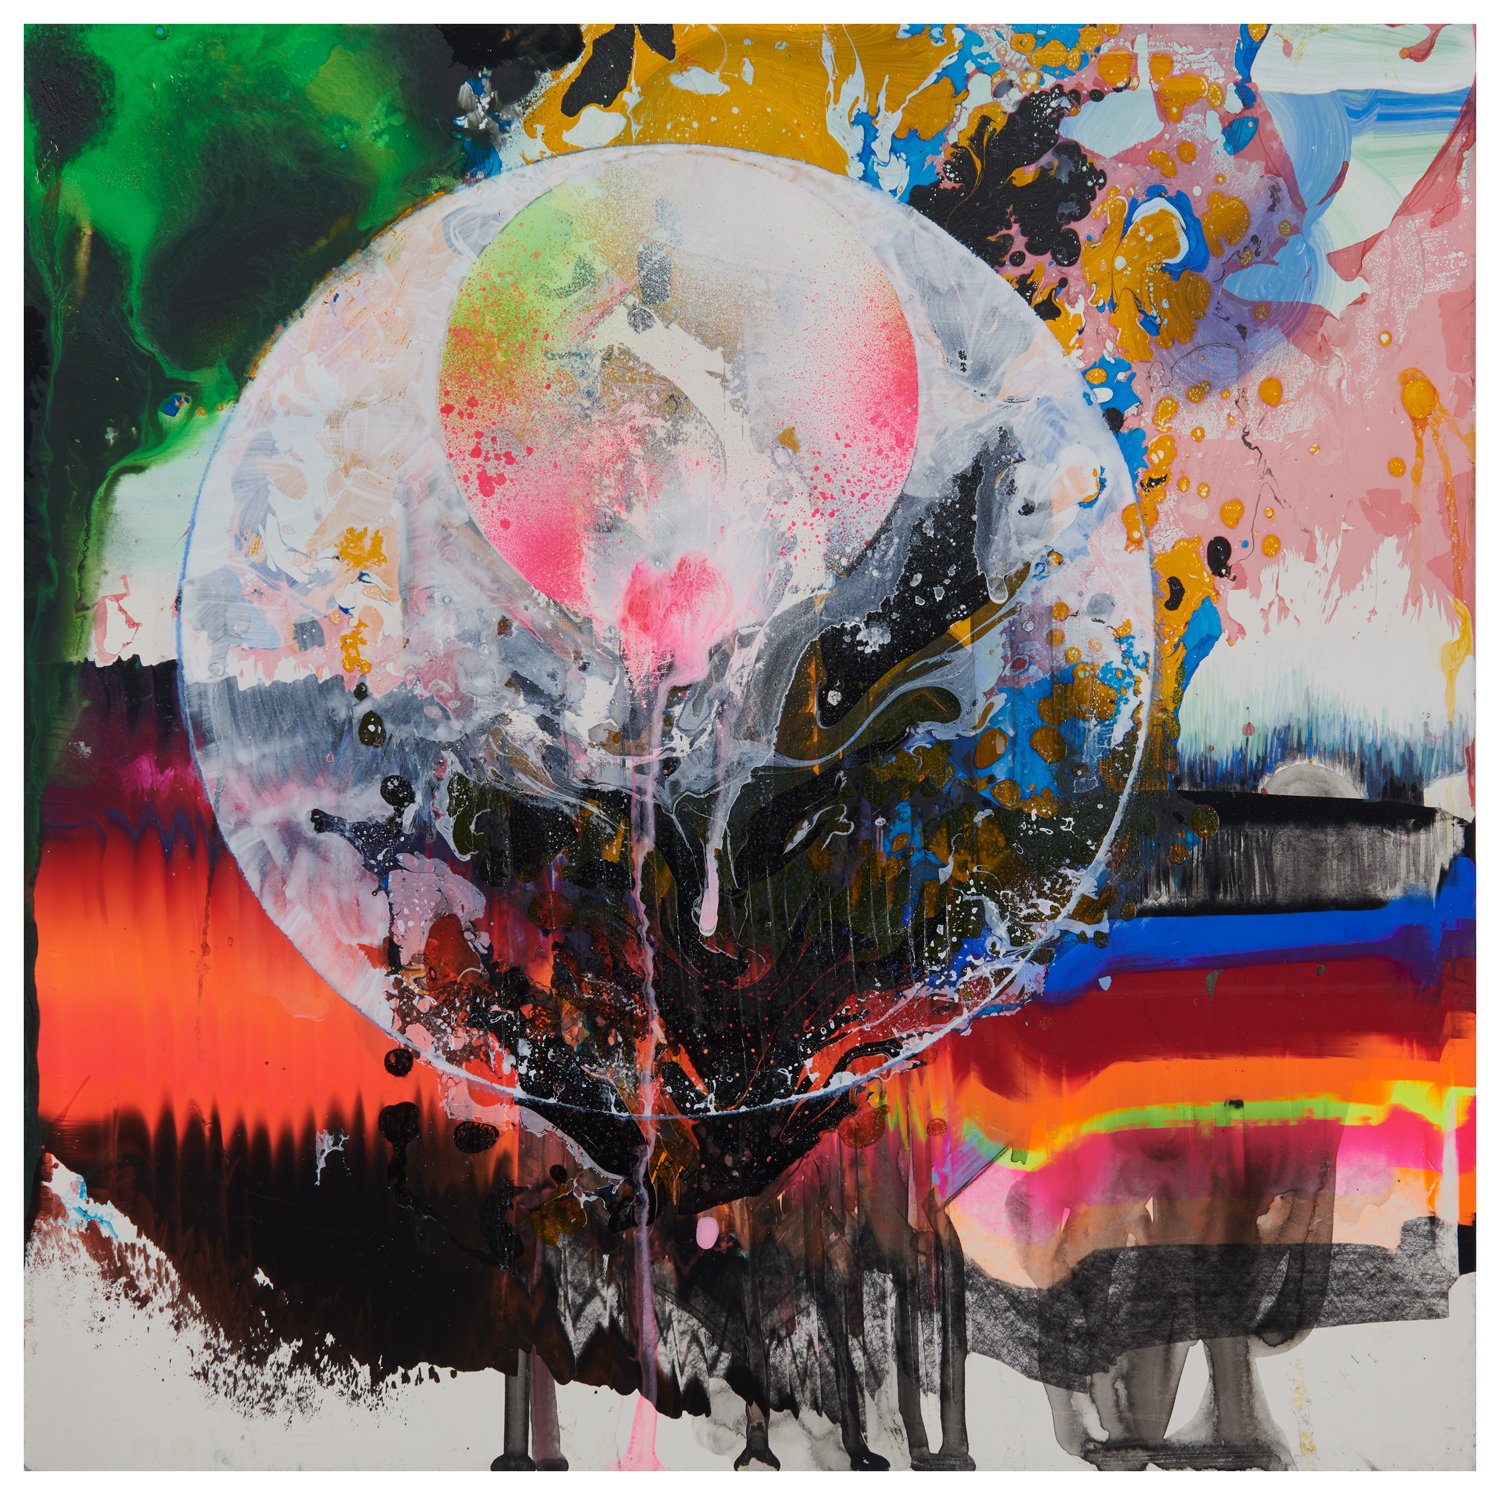 SOLD 2. Millie Benson Leaking Moon, Gouache, Spray Paint, Pencil on Wood 12 x 12 inches 2022.jpg